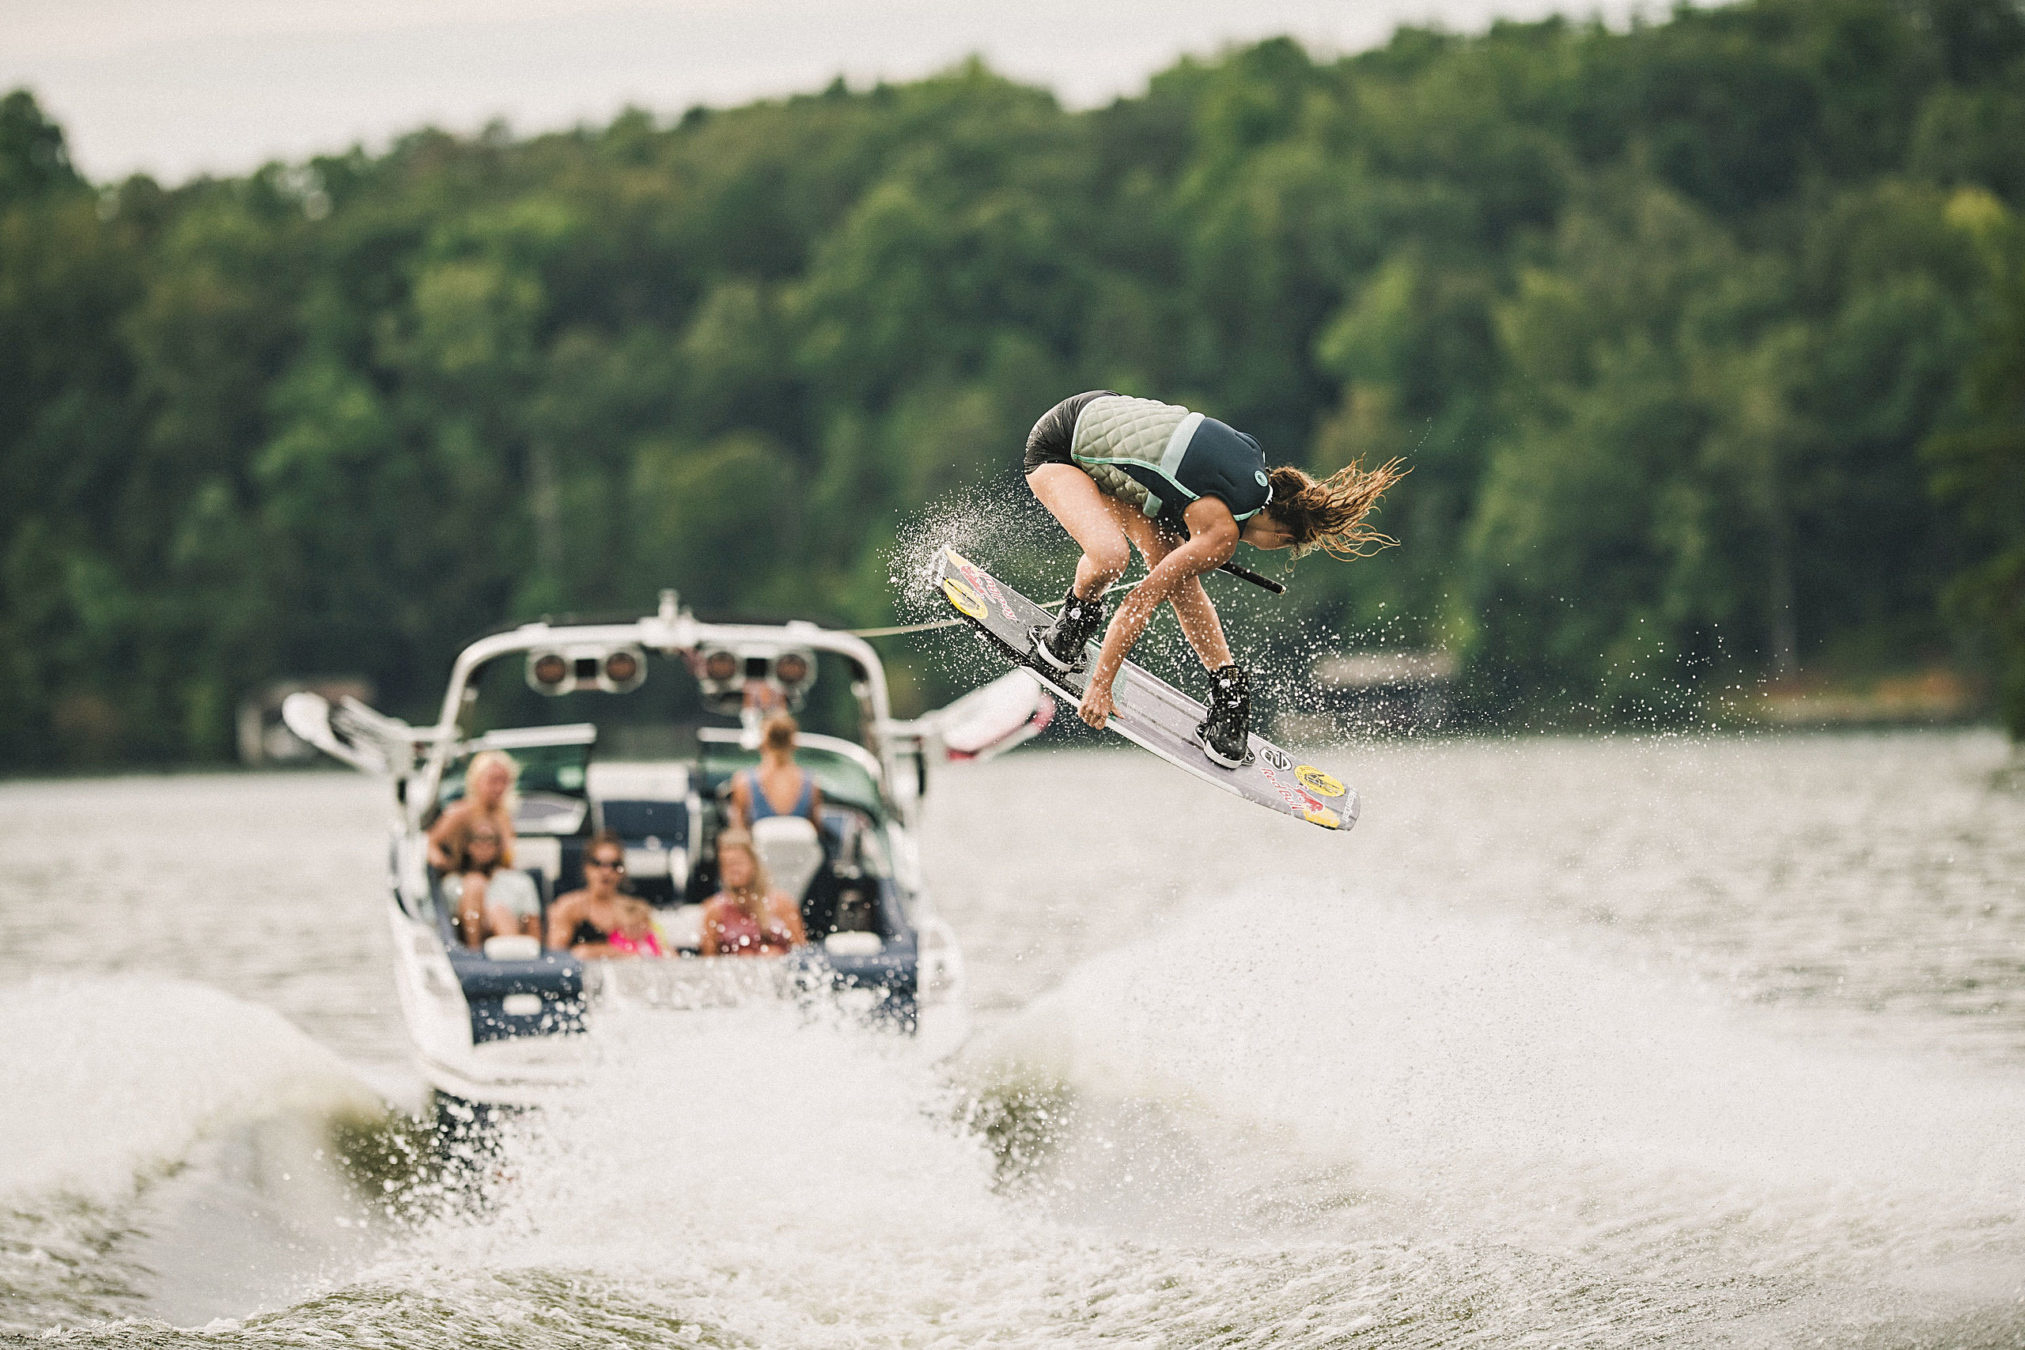 Wakeboarding: Meagan Ethell, United States Pro Wakeboarding Champion, Red Bull Extreme water sports star. 2030x1350 HD Background.